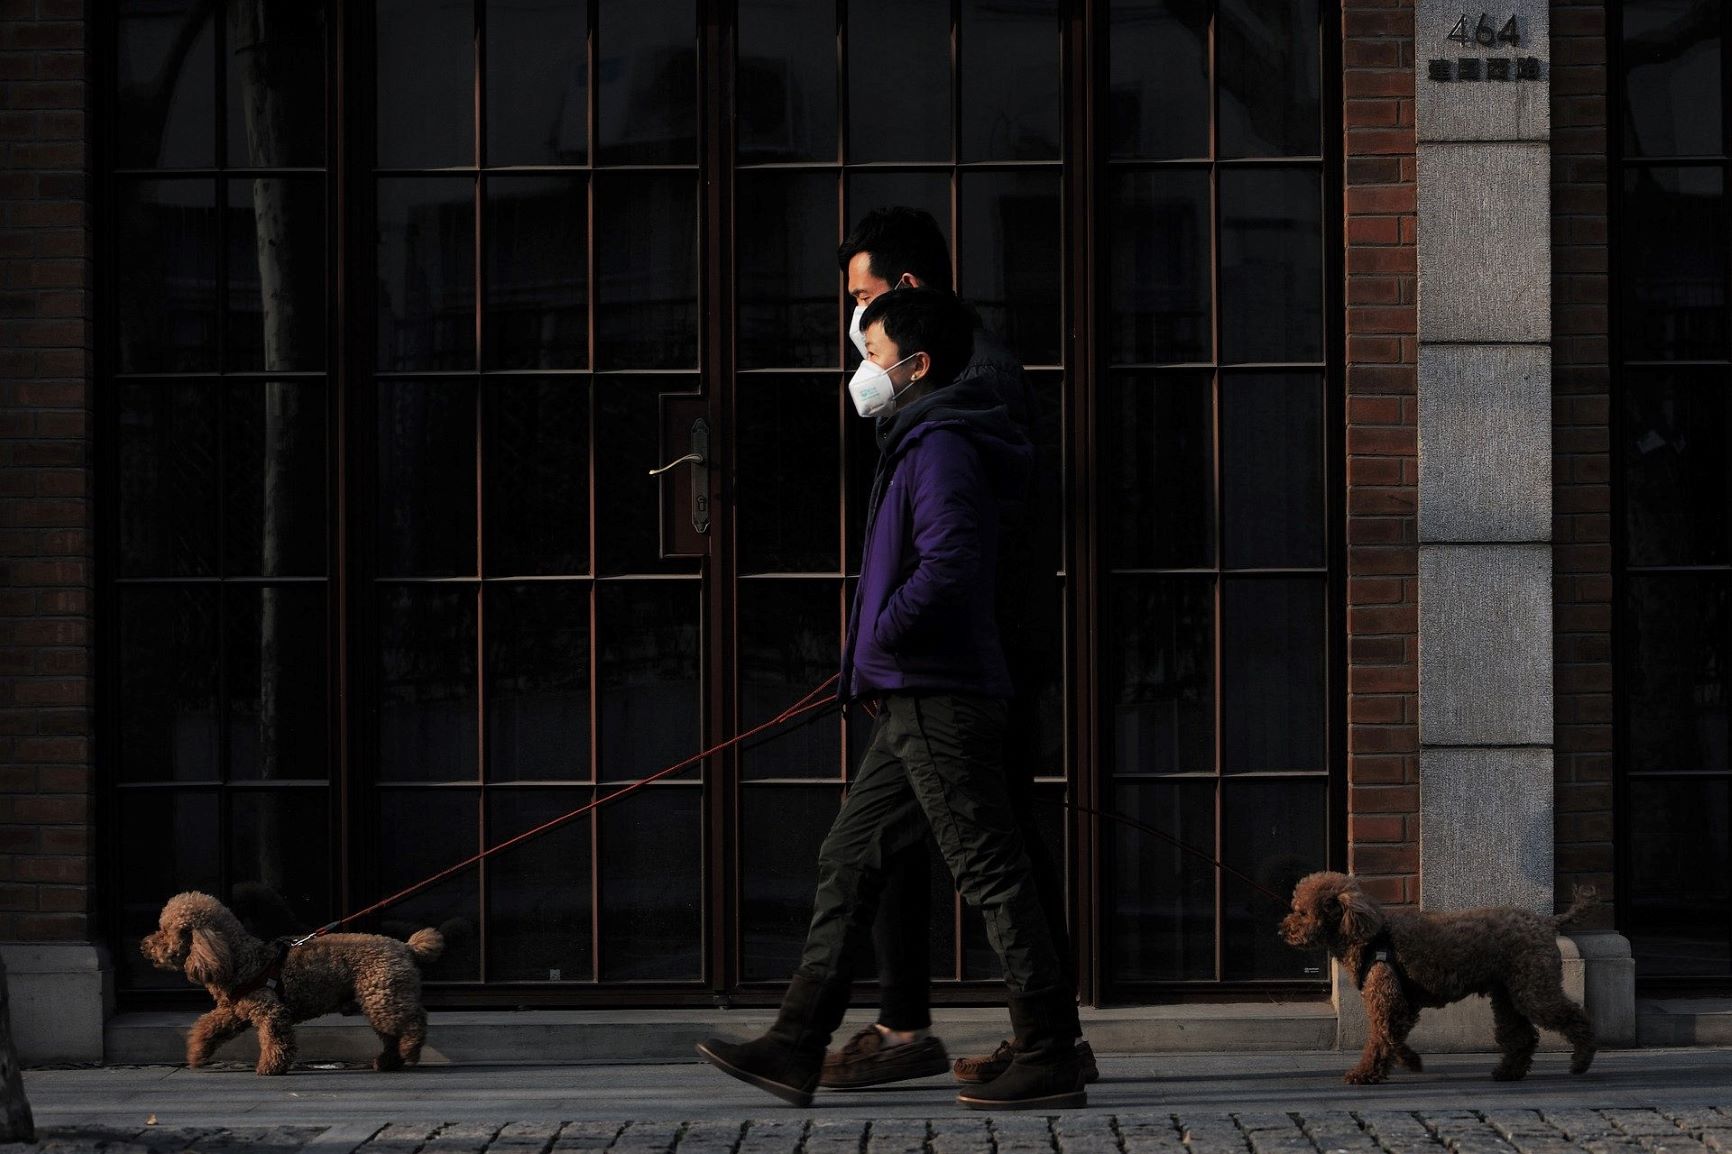 Two people wearing masks while walking their dogs